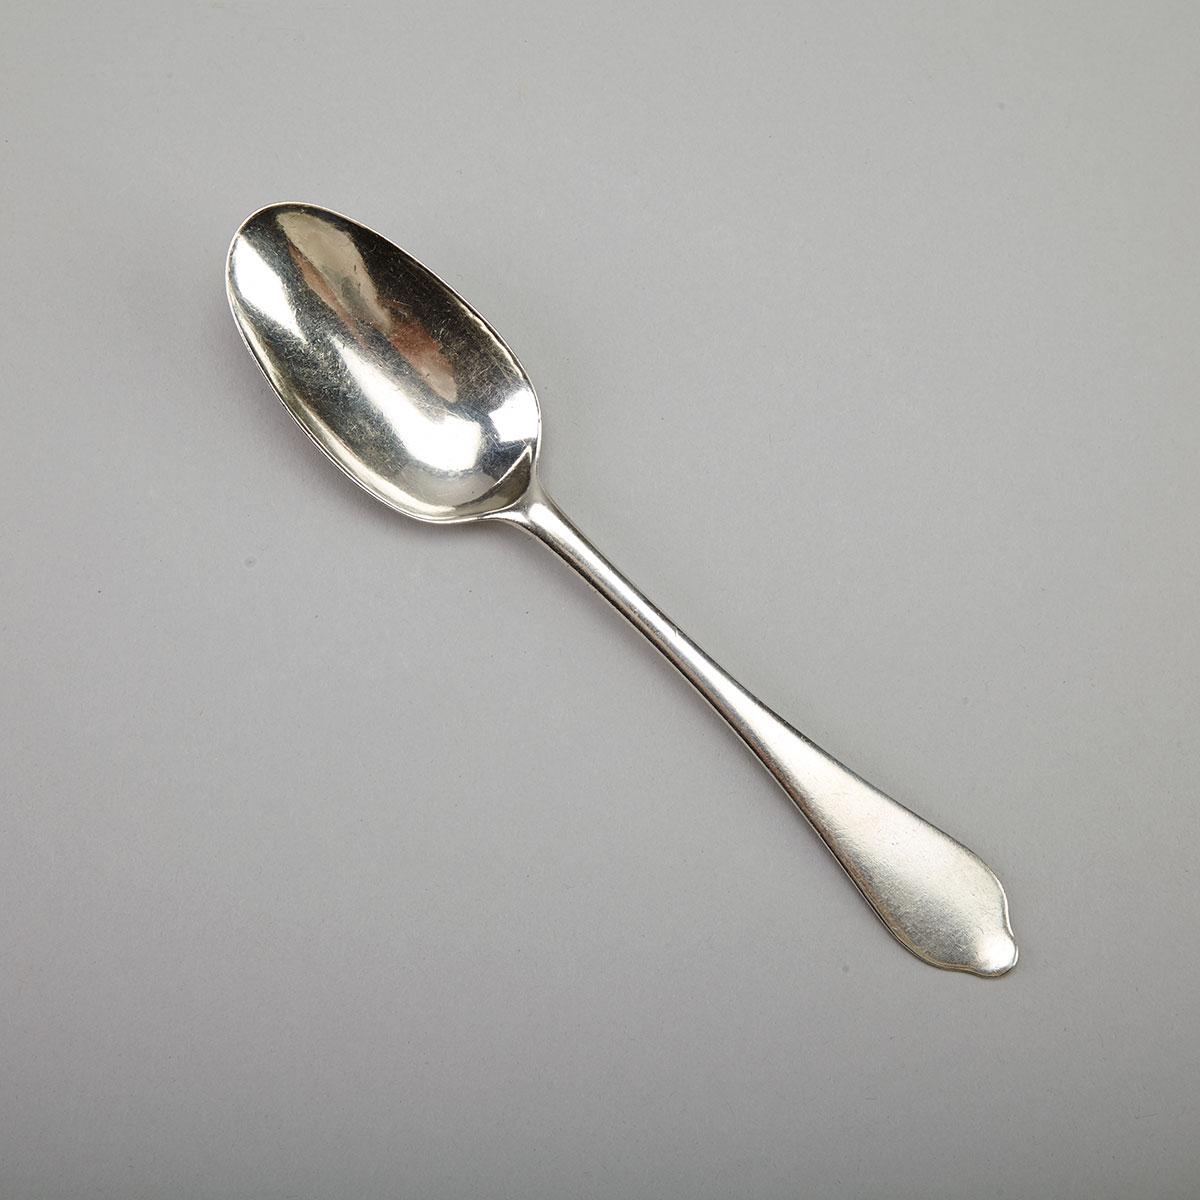 Queen Anne Silver Dog-Nose Spoon, London, 1706